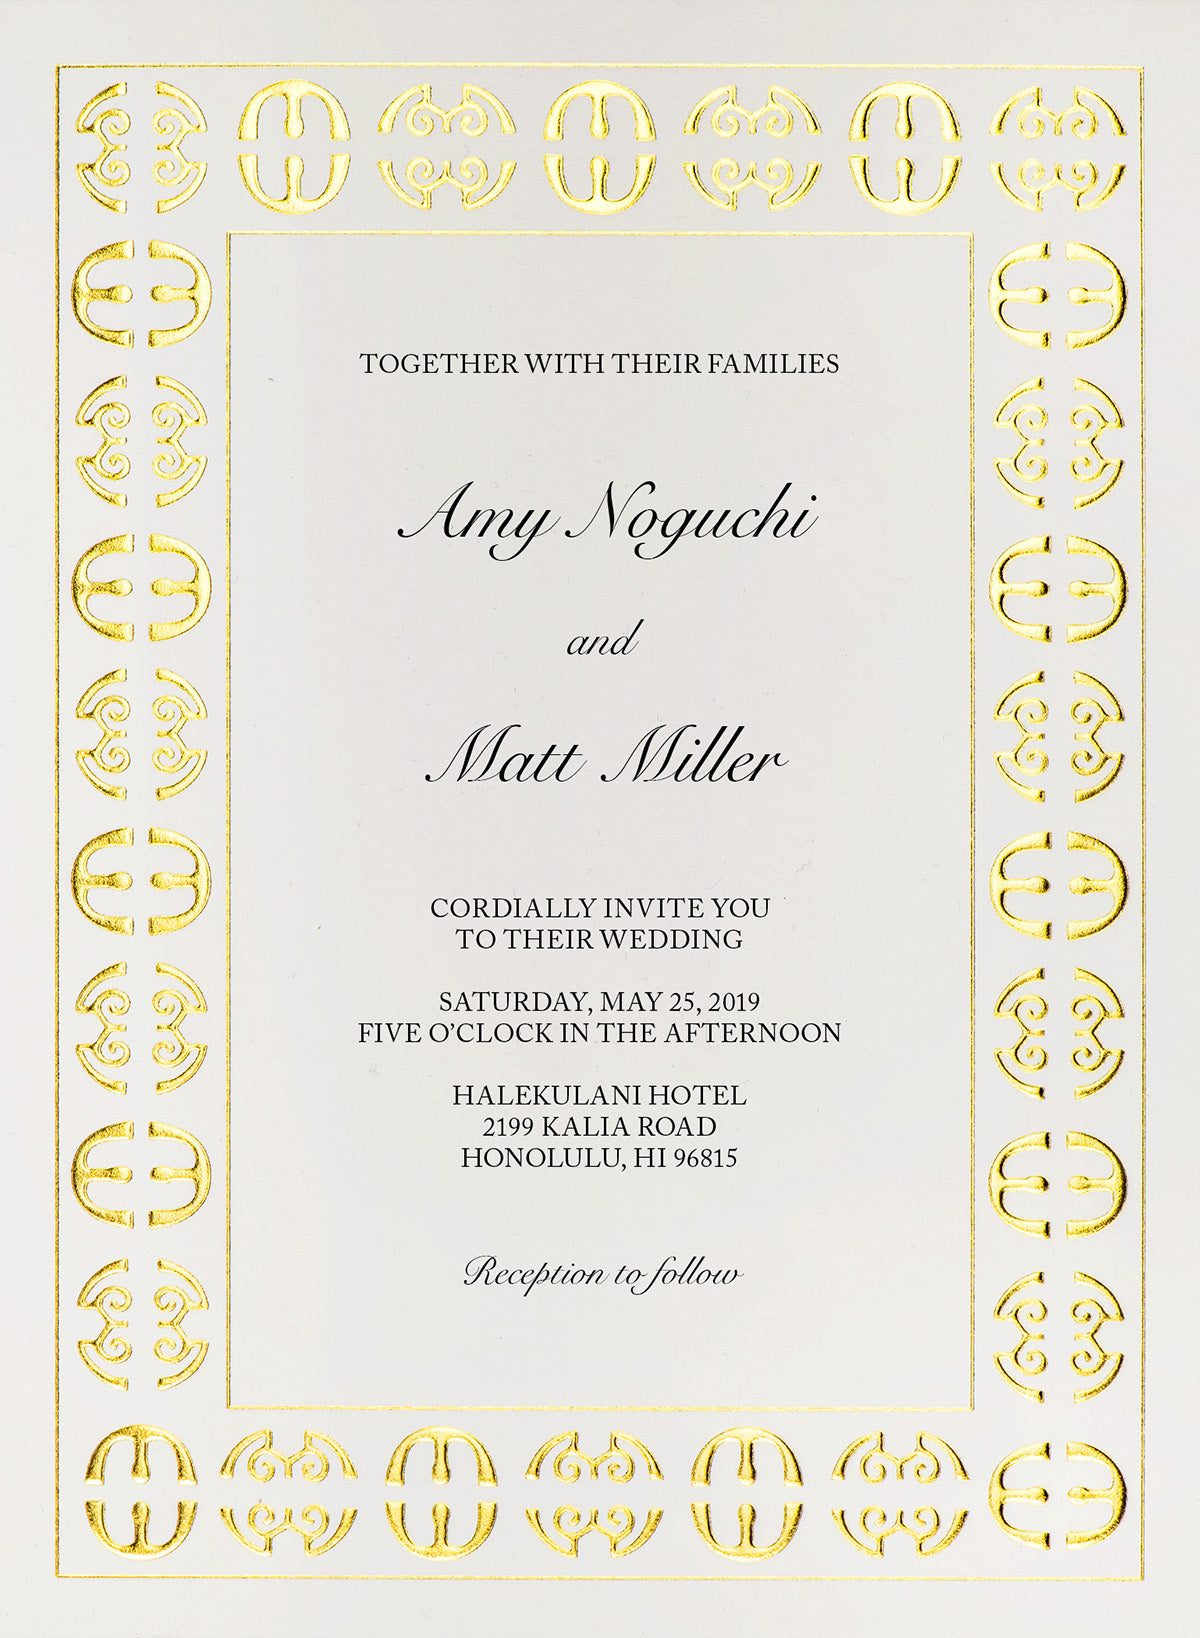 Invitation showing font options Snell Roundhand Regular and Adobe Caslon Pro Regular